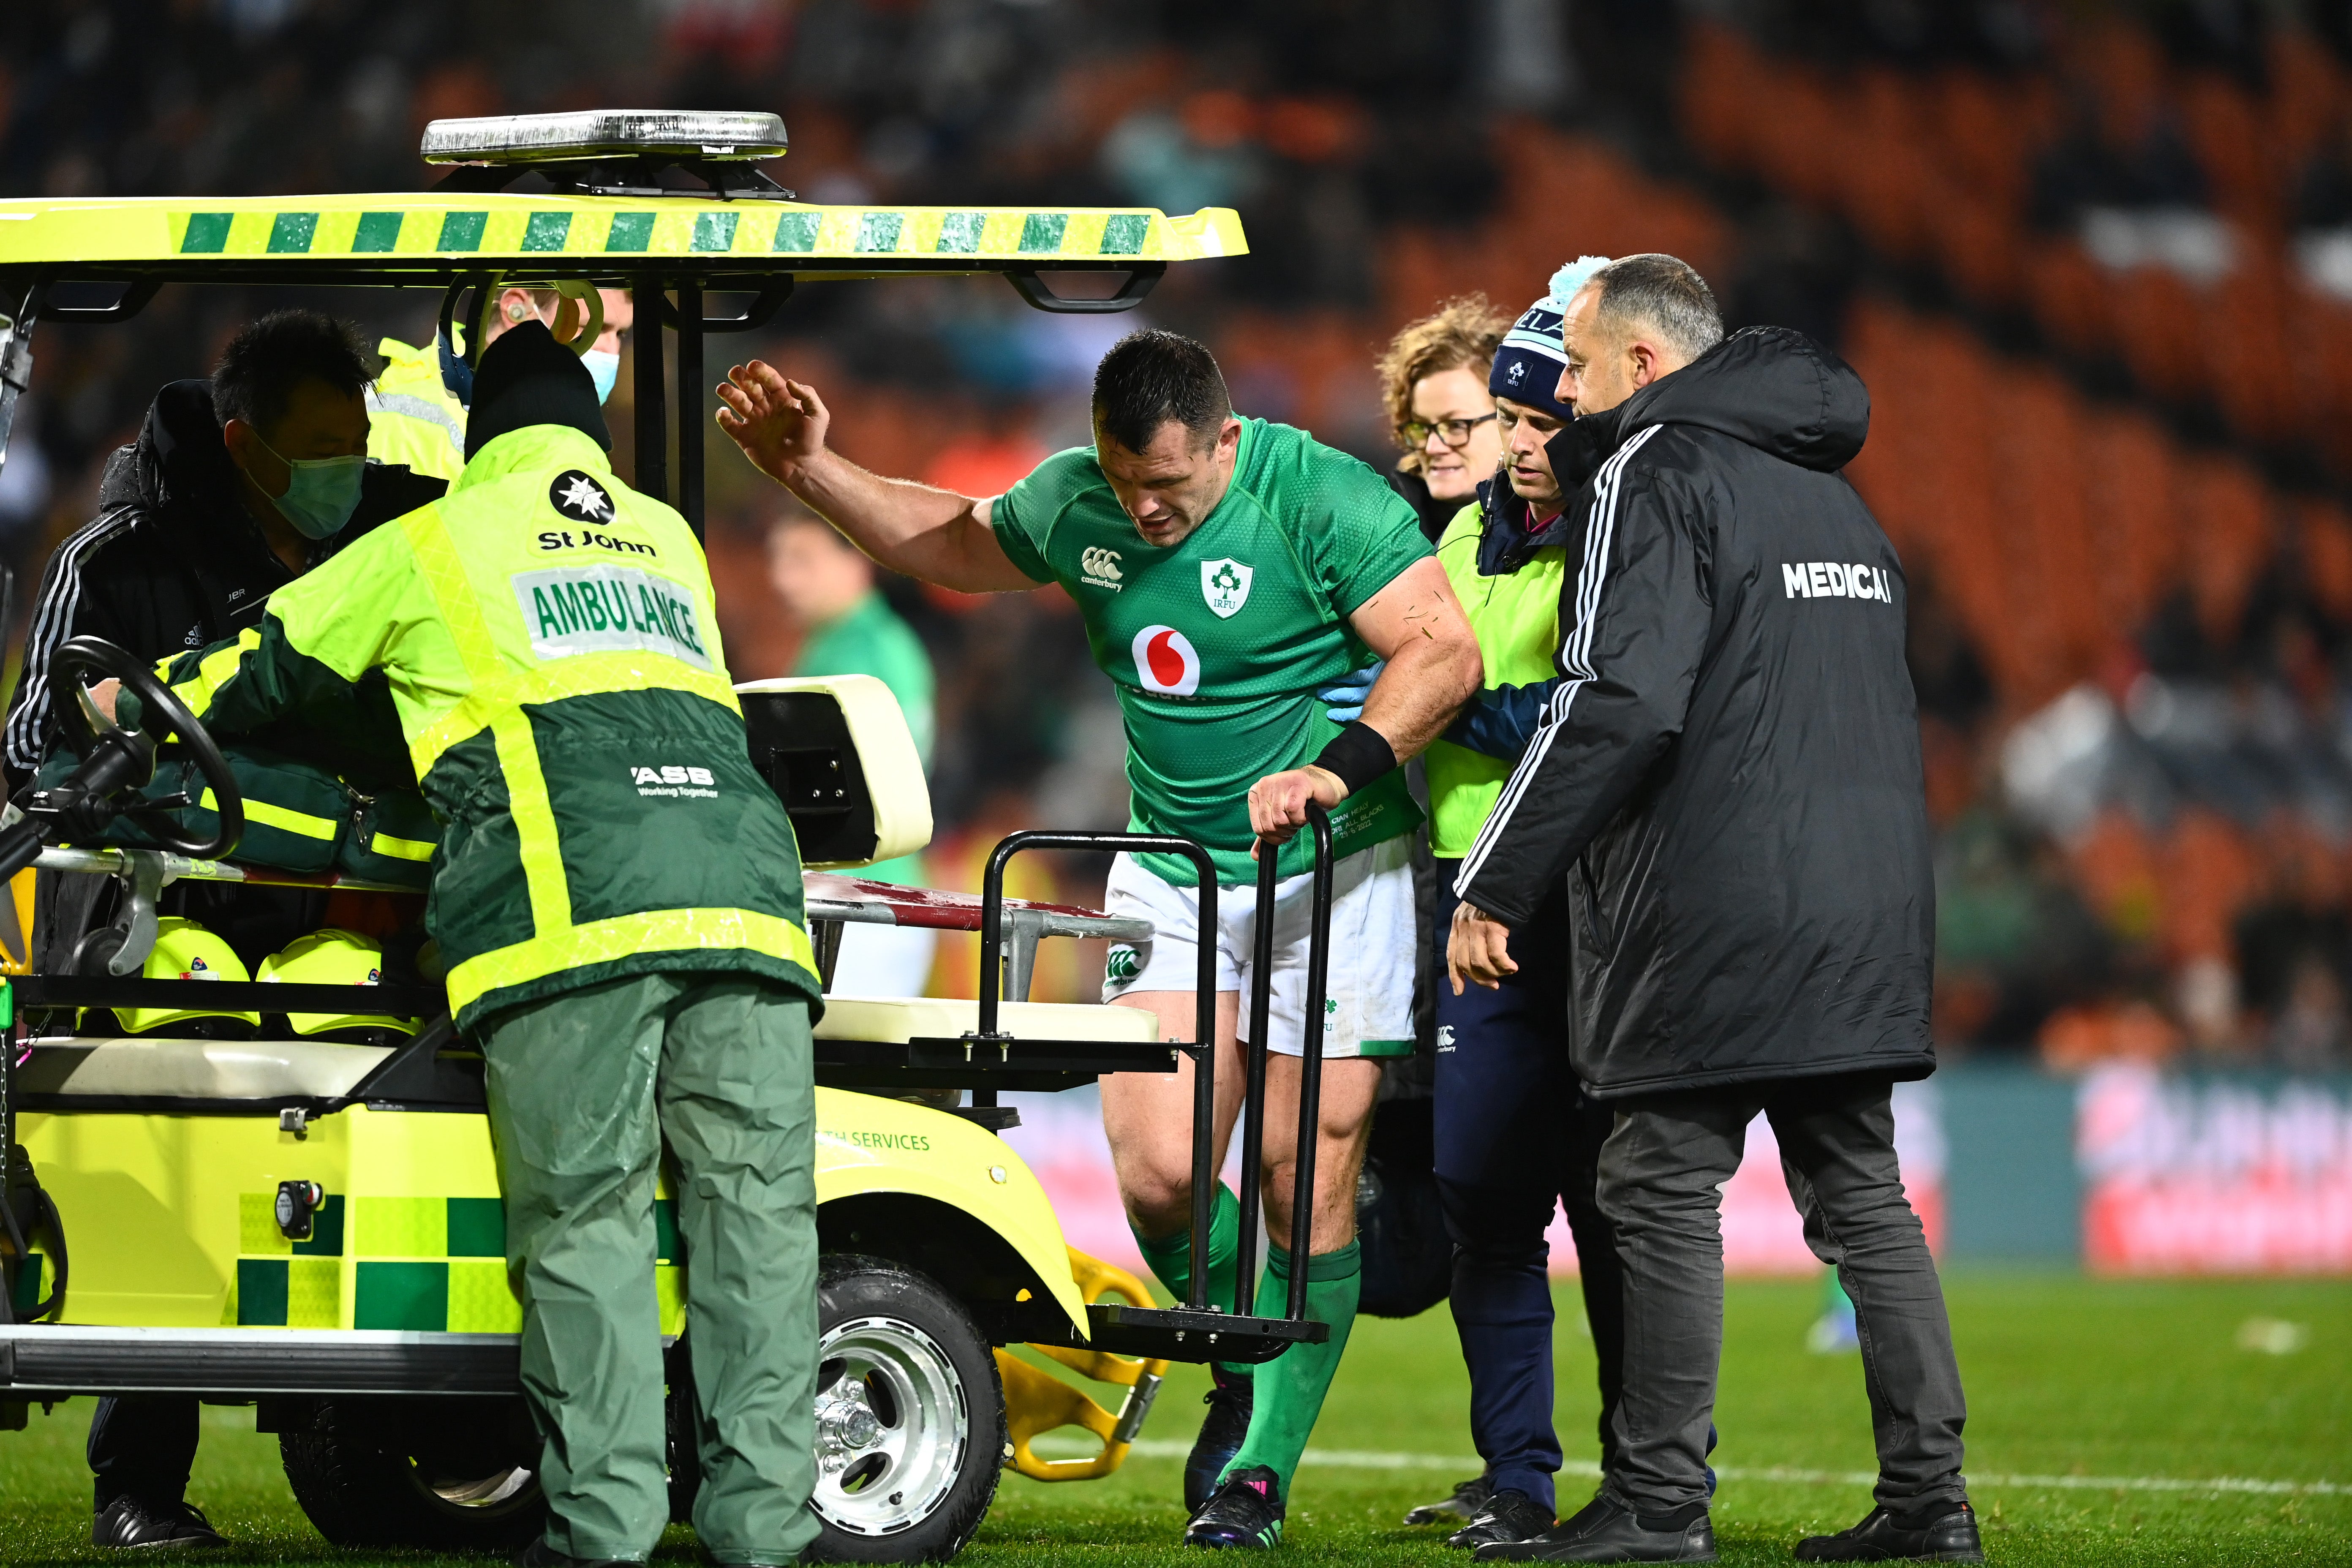 The veteran prop left the pitch on a medical cart